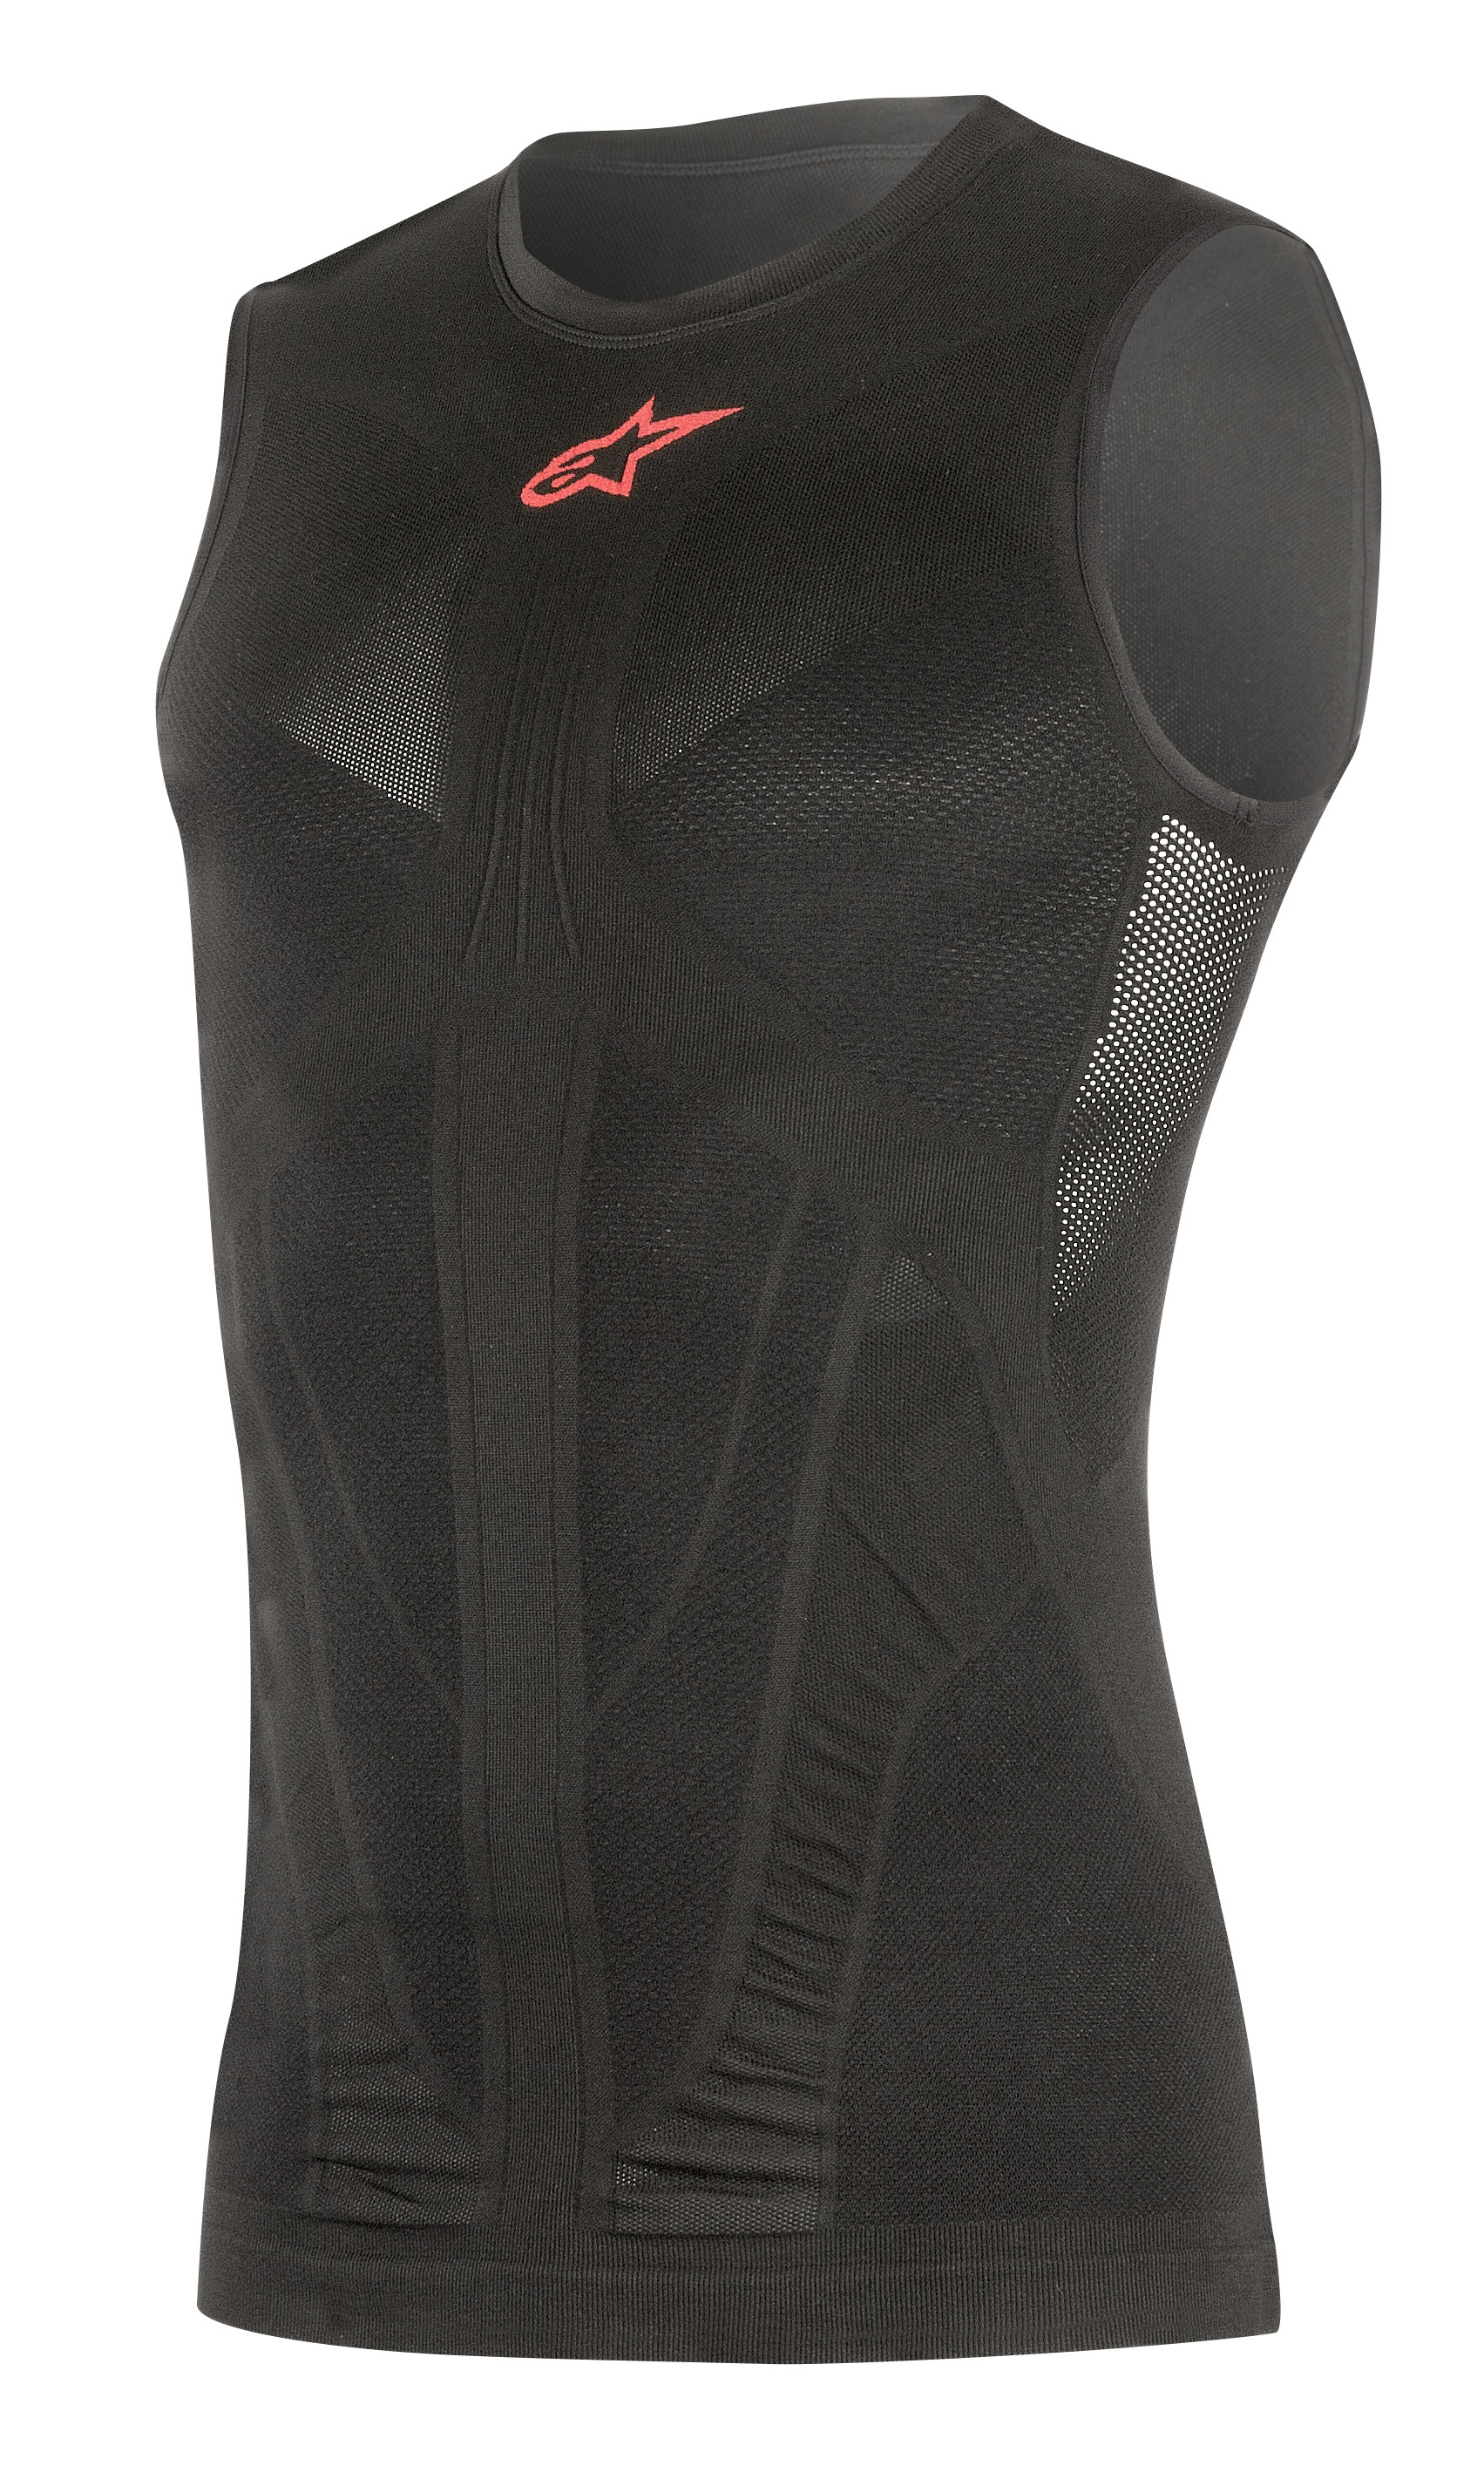 2019 Tech Tank Top Black/Red X-Small/Small - Click Image to Close